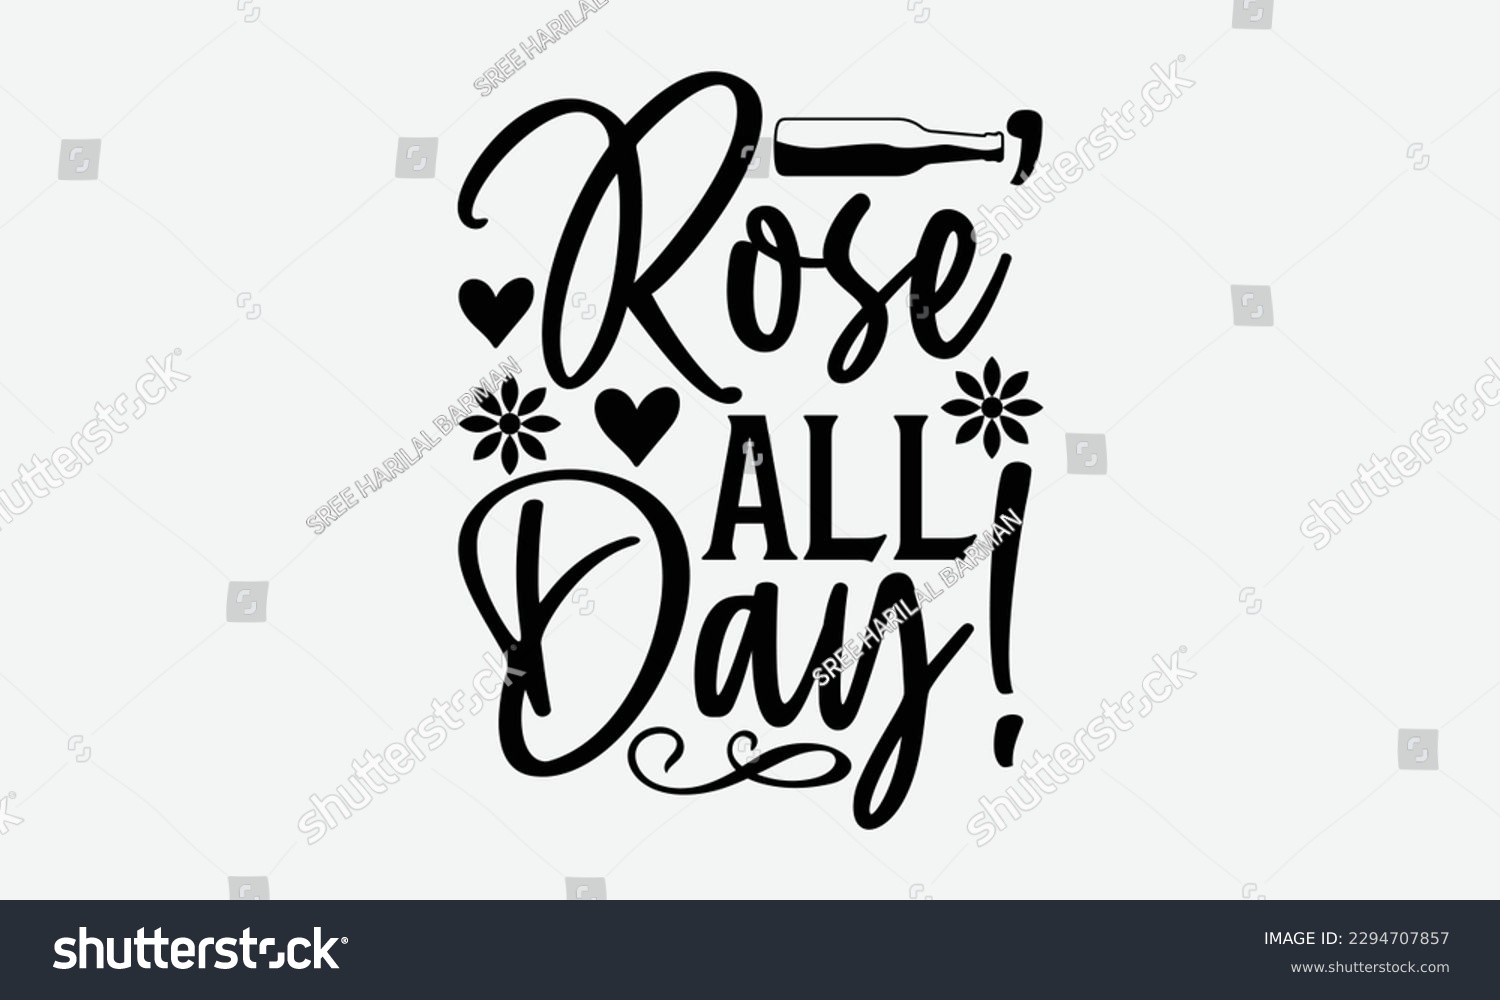 SVG of Rose’ all day! - Summer Svg typography t-shirt design, Hand drawn lettering phrase, Greeting cards, templates, mugs, templates,  posters,  stickers, eps 10. svg